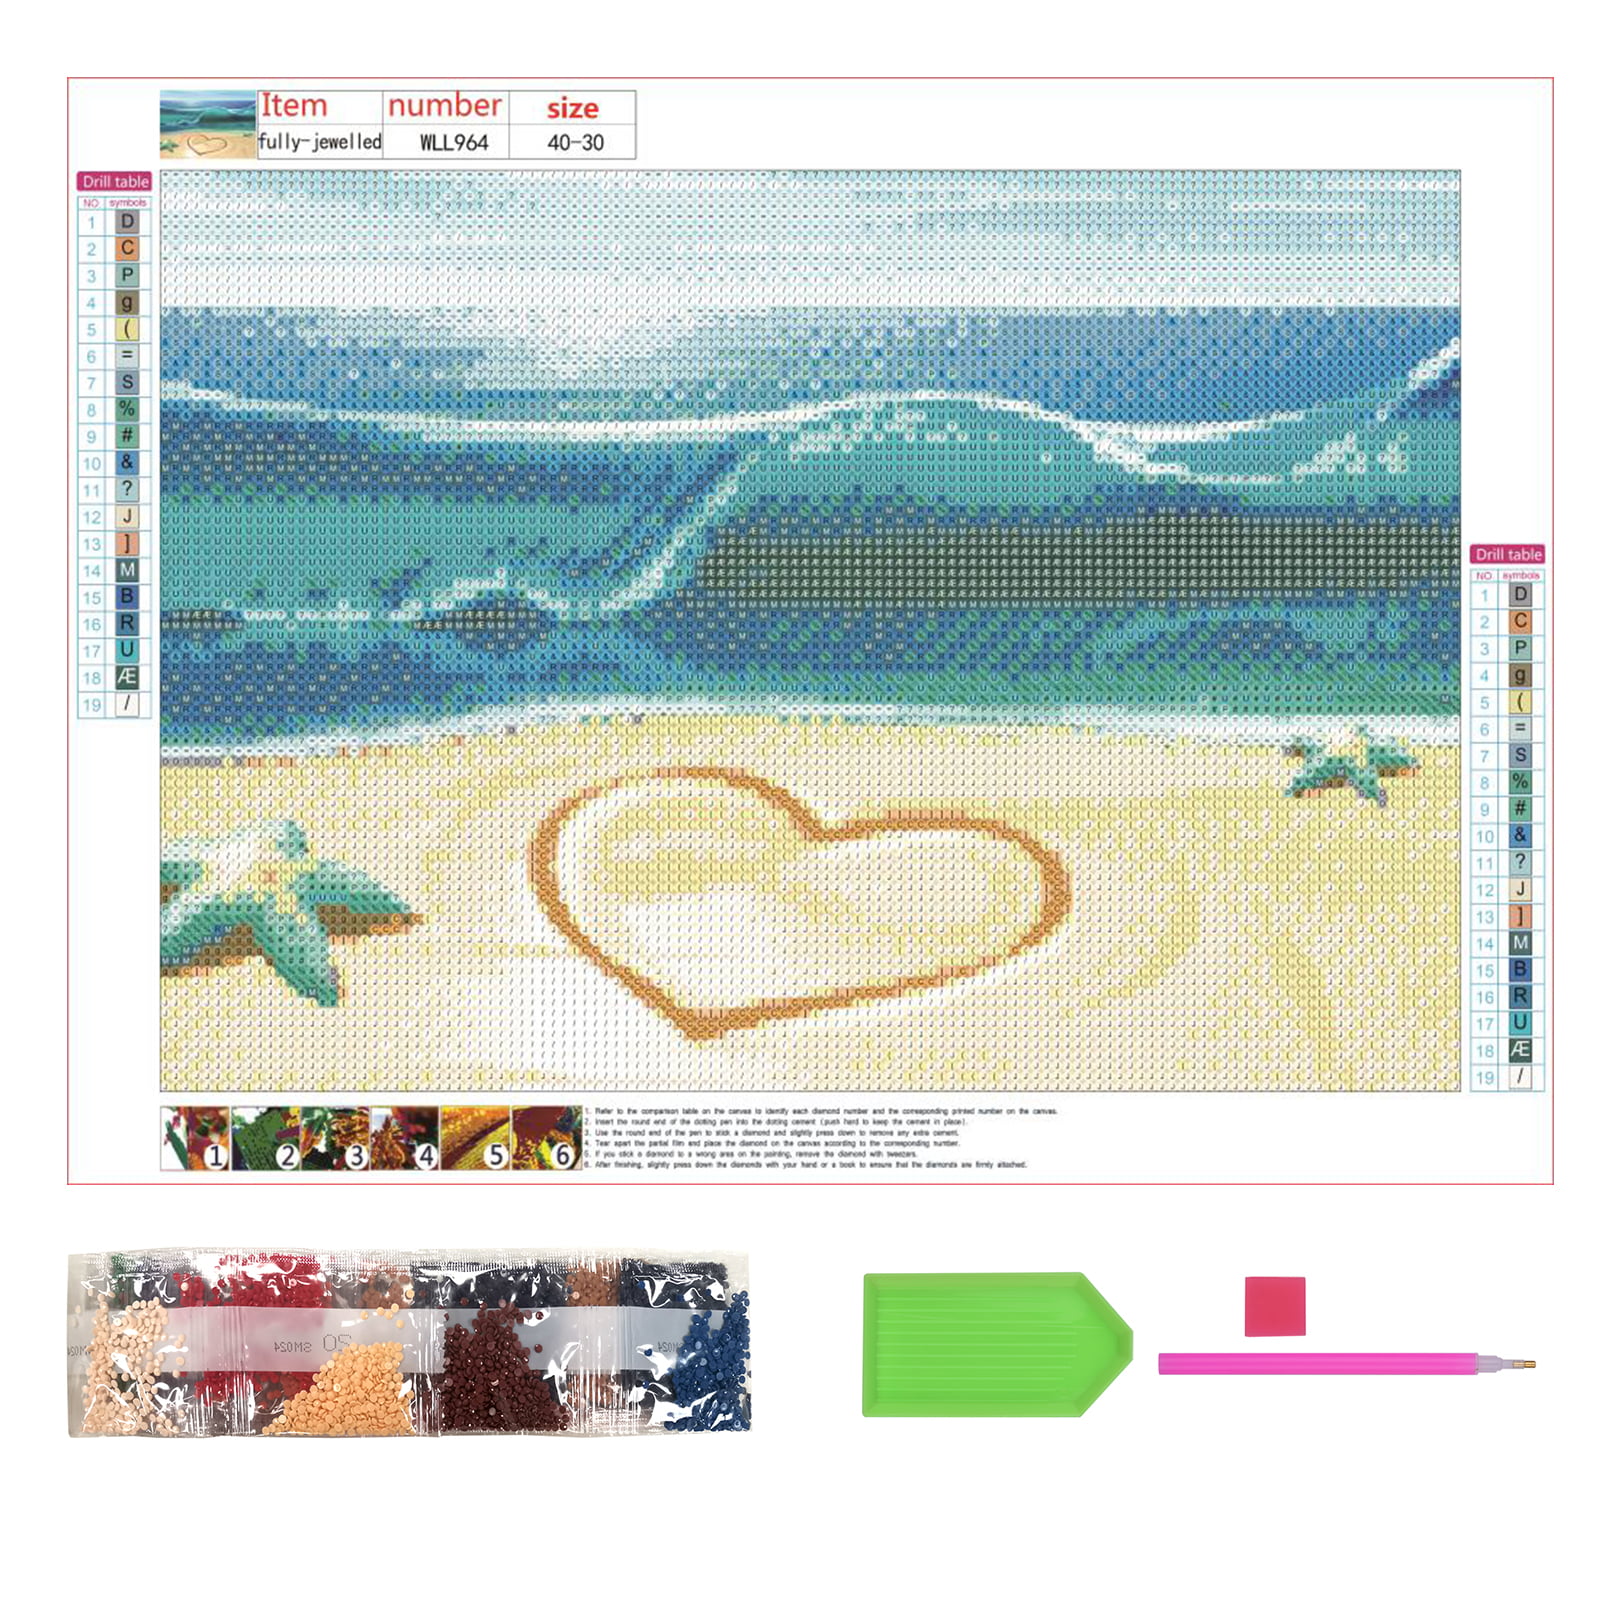 Details about   Full Drill 5D Diamond Painting Embroidery Arts Craft DIY for Home Decor 30*30cm